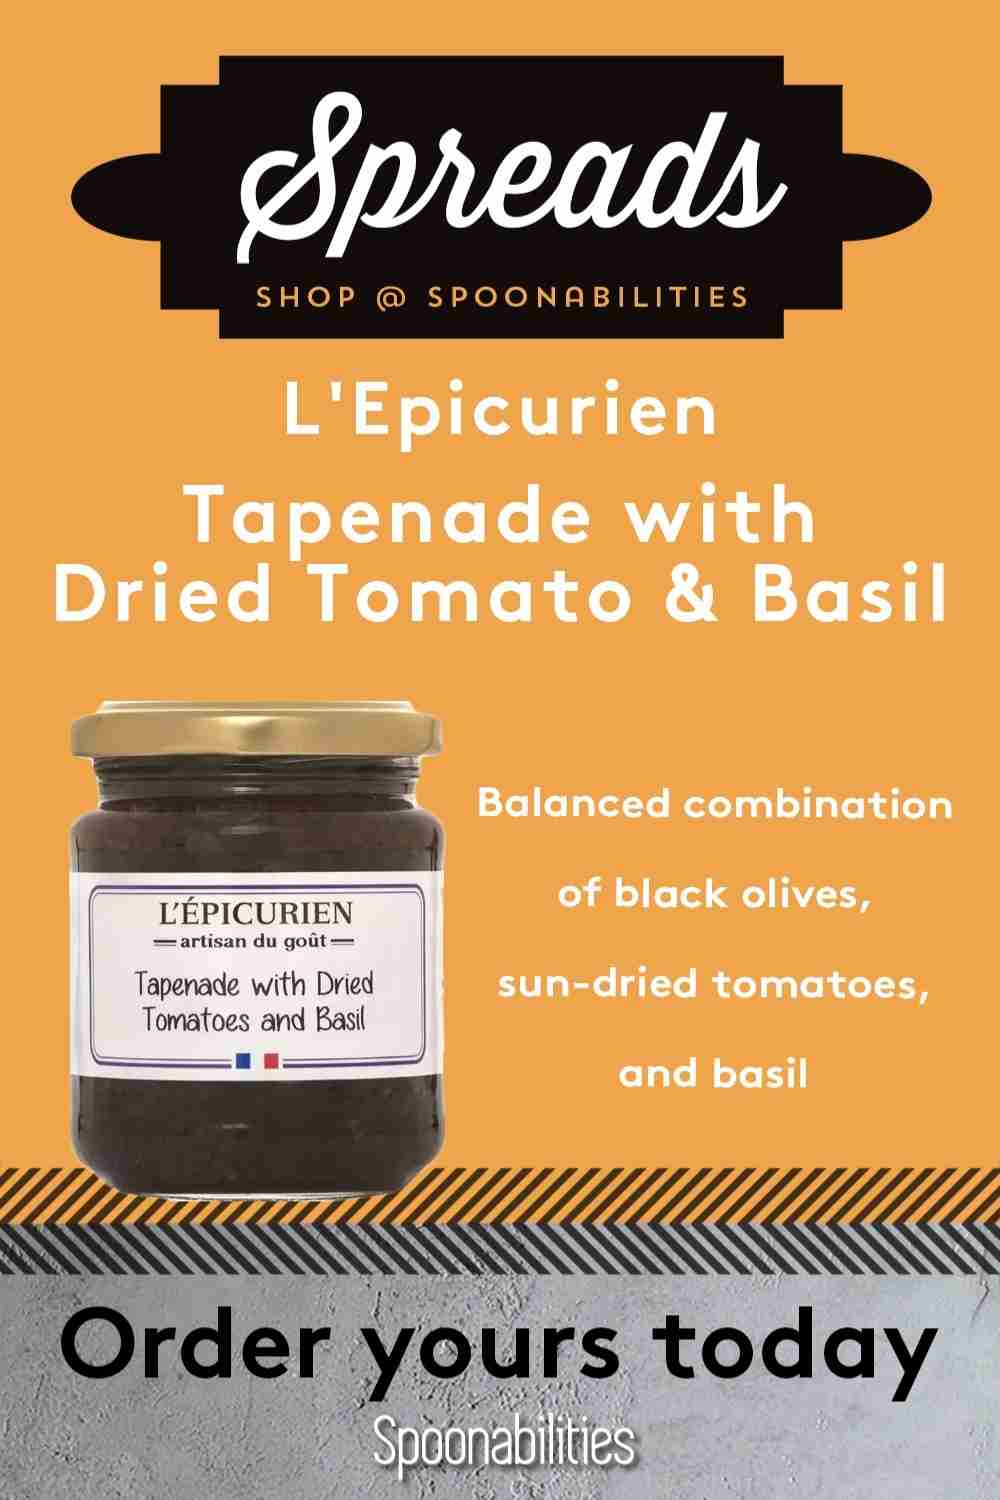 Tapenade with Dried Tomato & Basil L’Epicurien